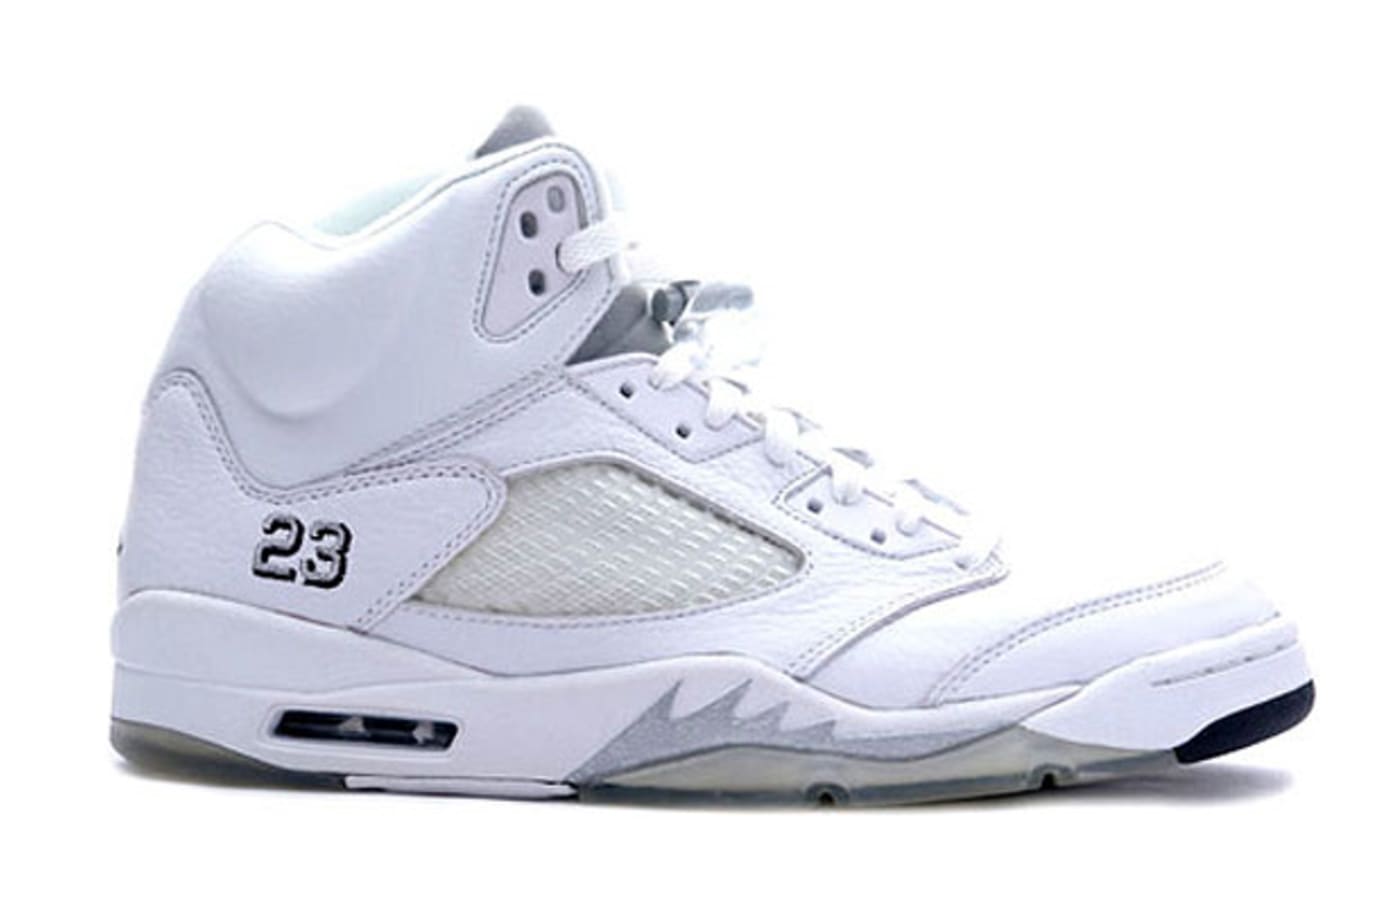 Asumir Marinero Humo The 15 Best Air Jordan V Colorways of All Time | Complex